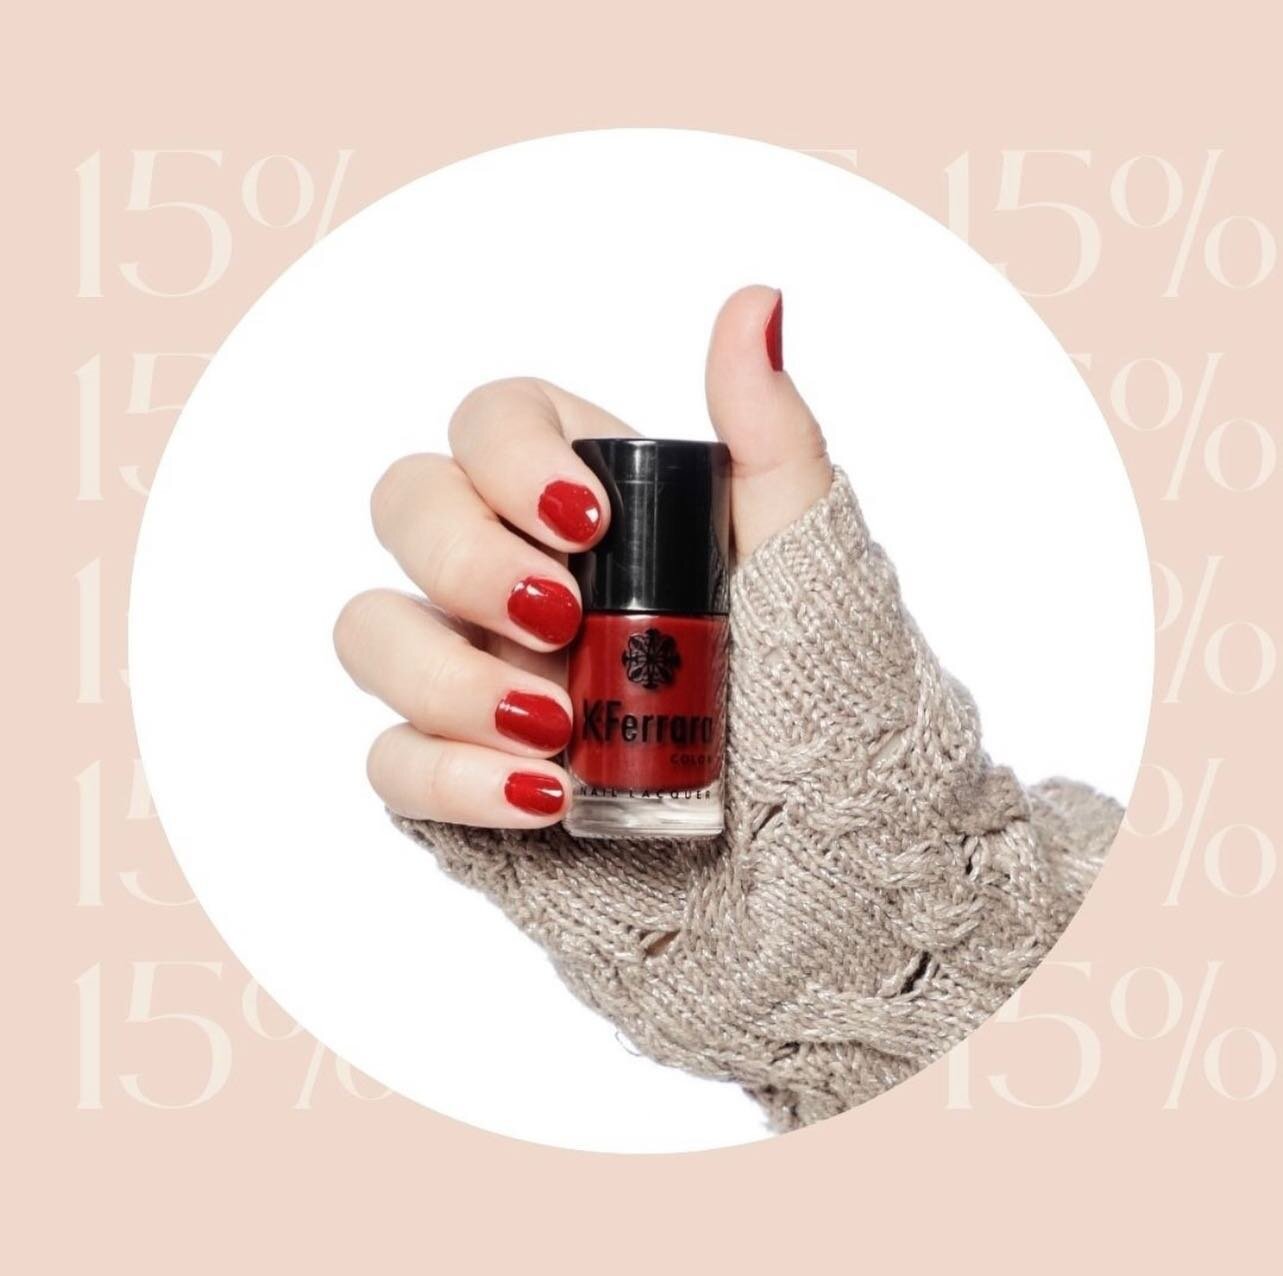 DEC 1
It&rsquo;s officially December! And St. Nick&rsquo;s day is right around the corner! Use code STNICK15 for 15% off all K. Ferrara Color orders from today until St. Nick&rsquo;s day! ❤️

#kferraracolor #nails #nailsofinstagram #nailart #nailinsp